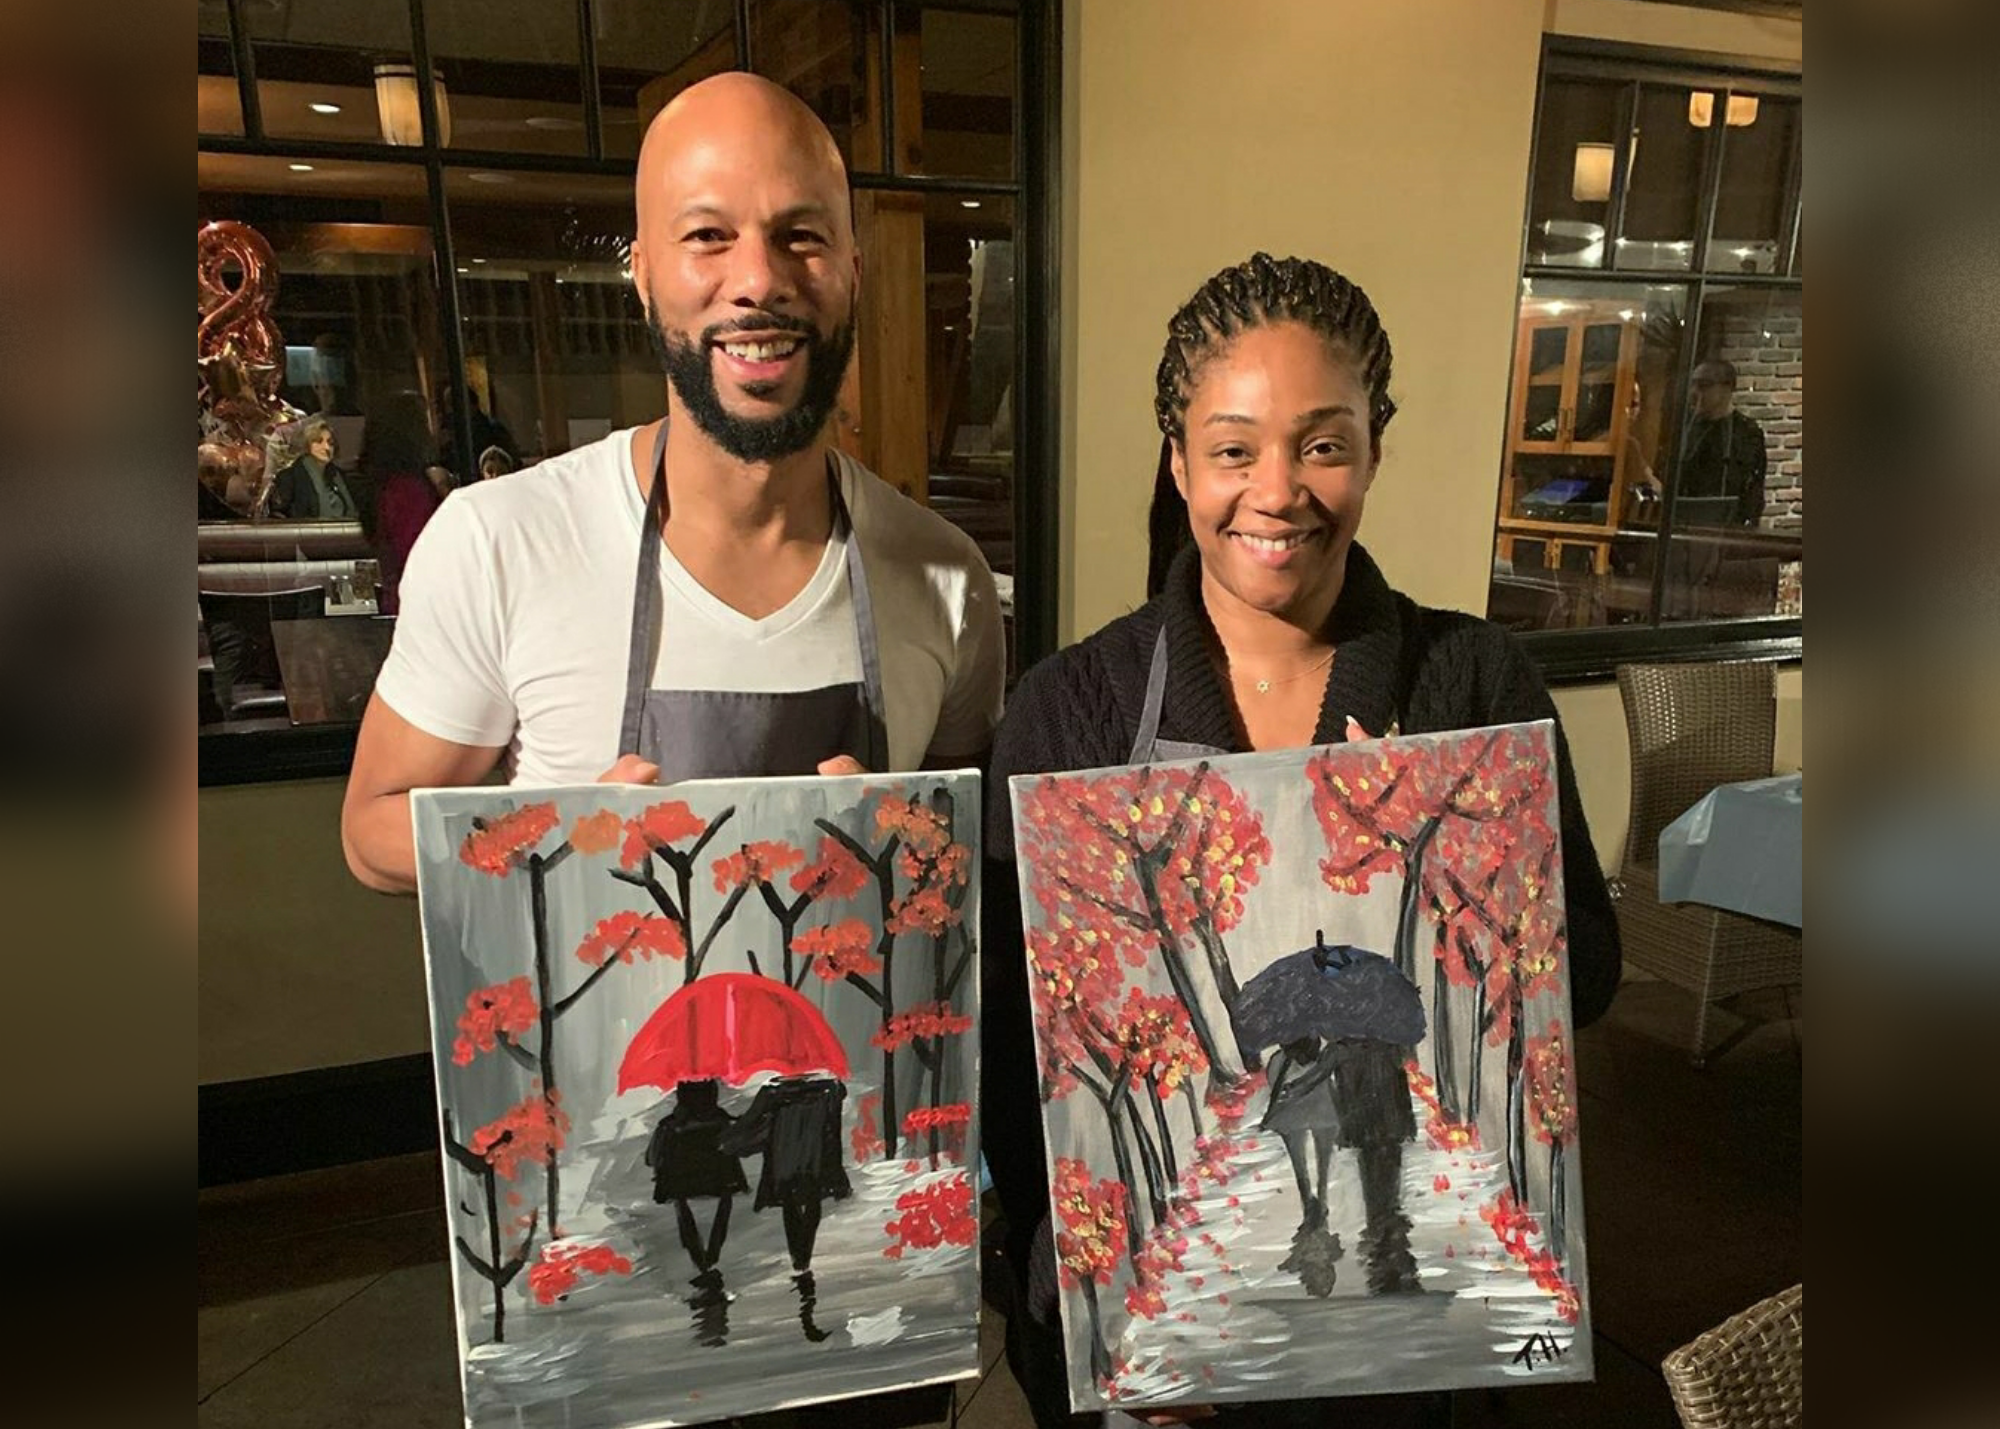 Tiffany Haddish Confirms She’s Dating Common: “…The Best Relationship I’ve Ever Been In”